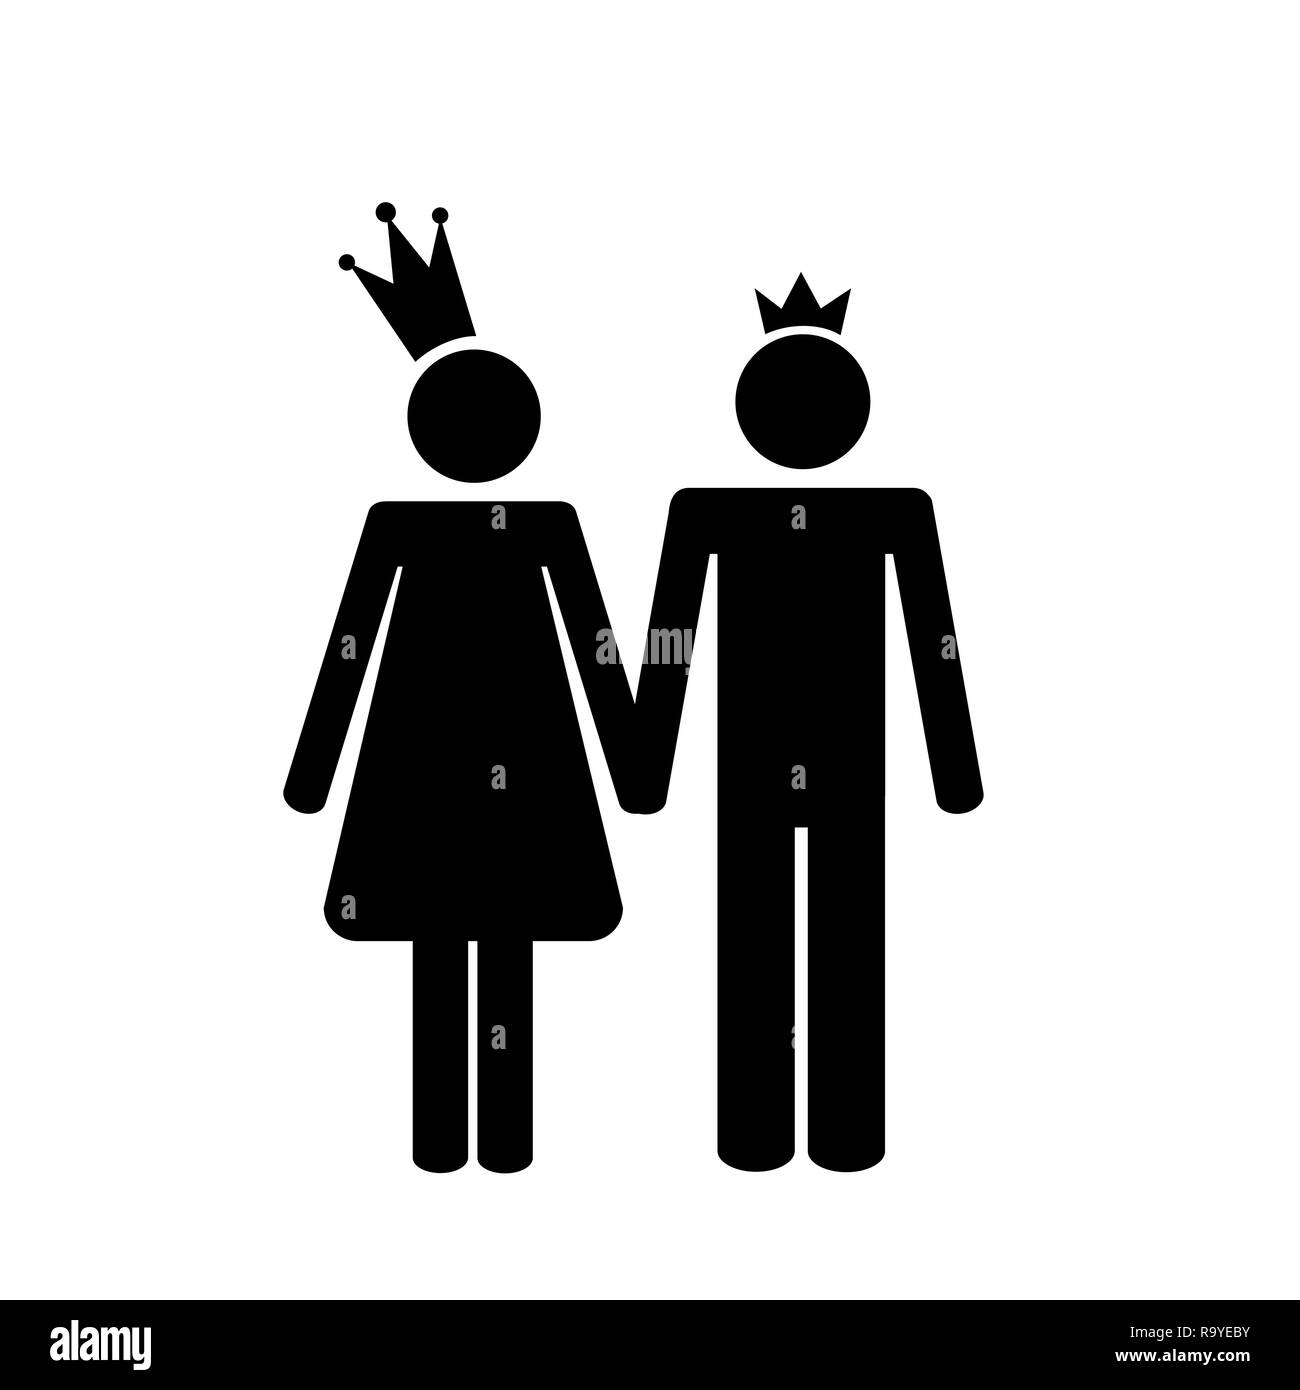 prince and princess with crown pictogram vector illustration Stock Vector